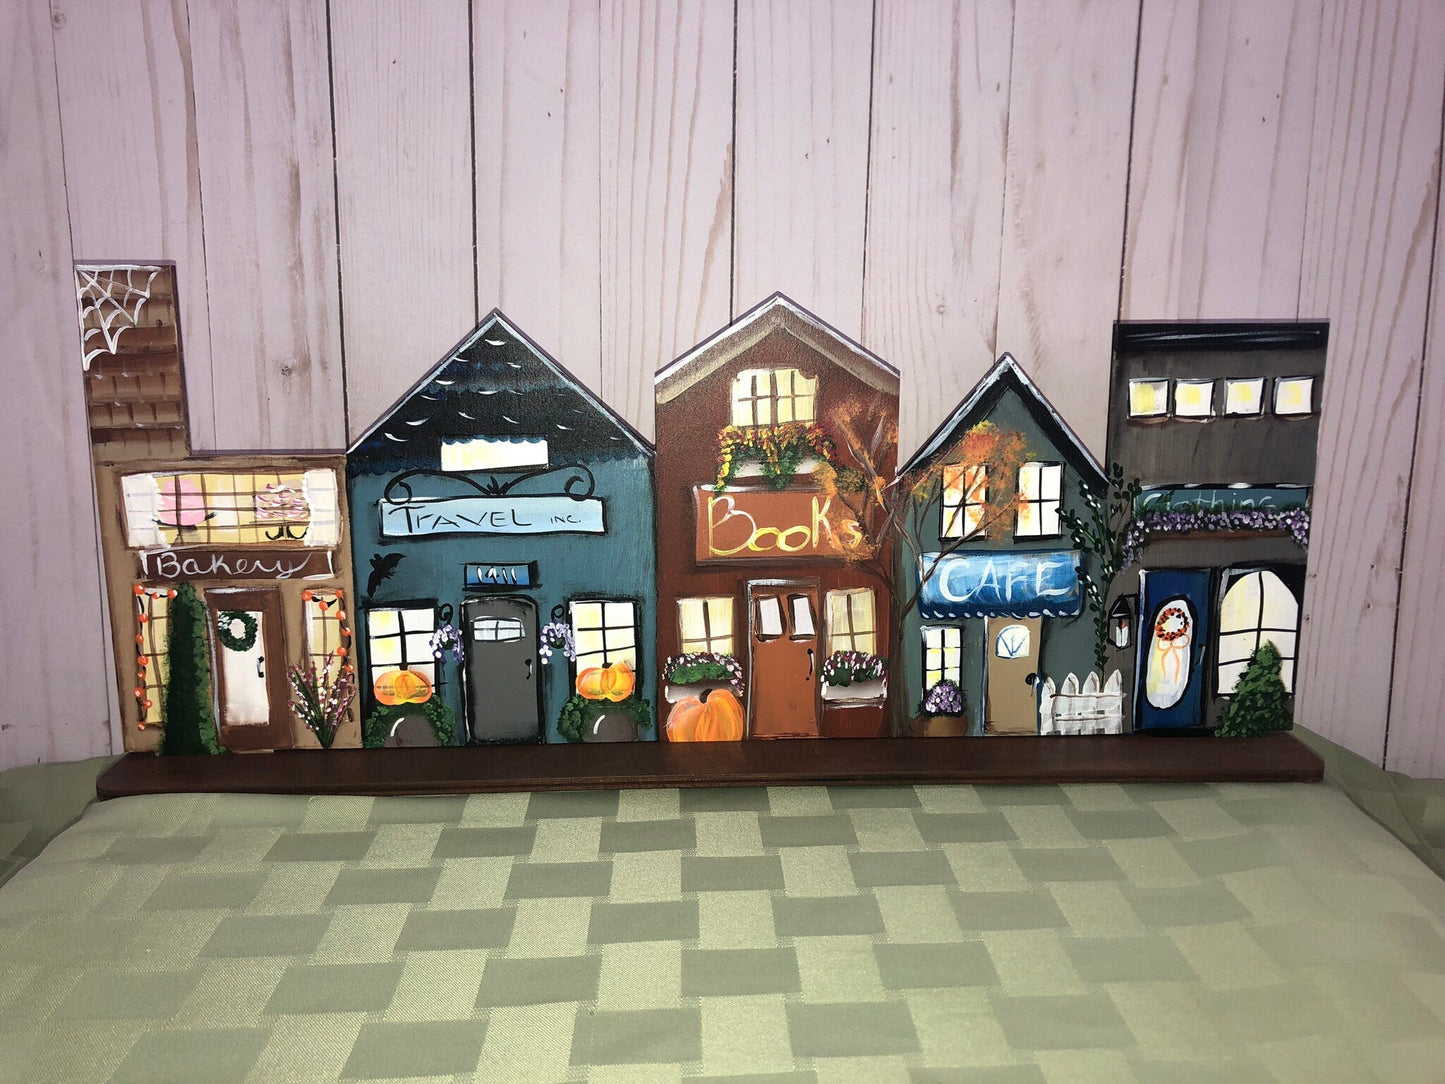 Fall Village for Mantel-Hand Painted Design for Fall or Autumn Shelf Sitter